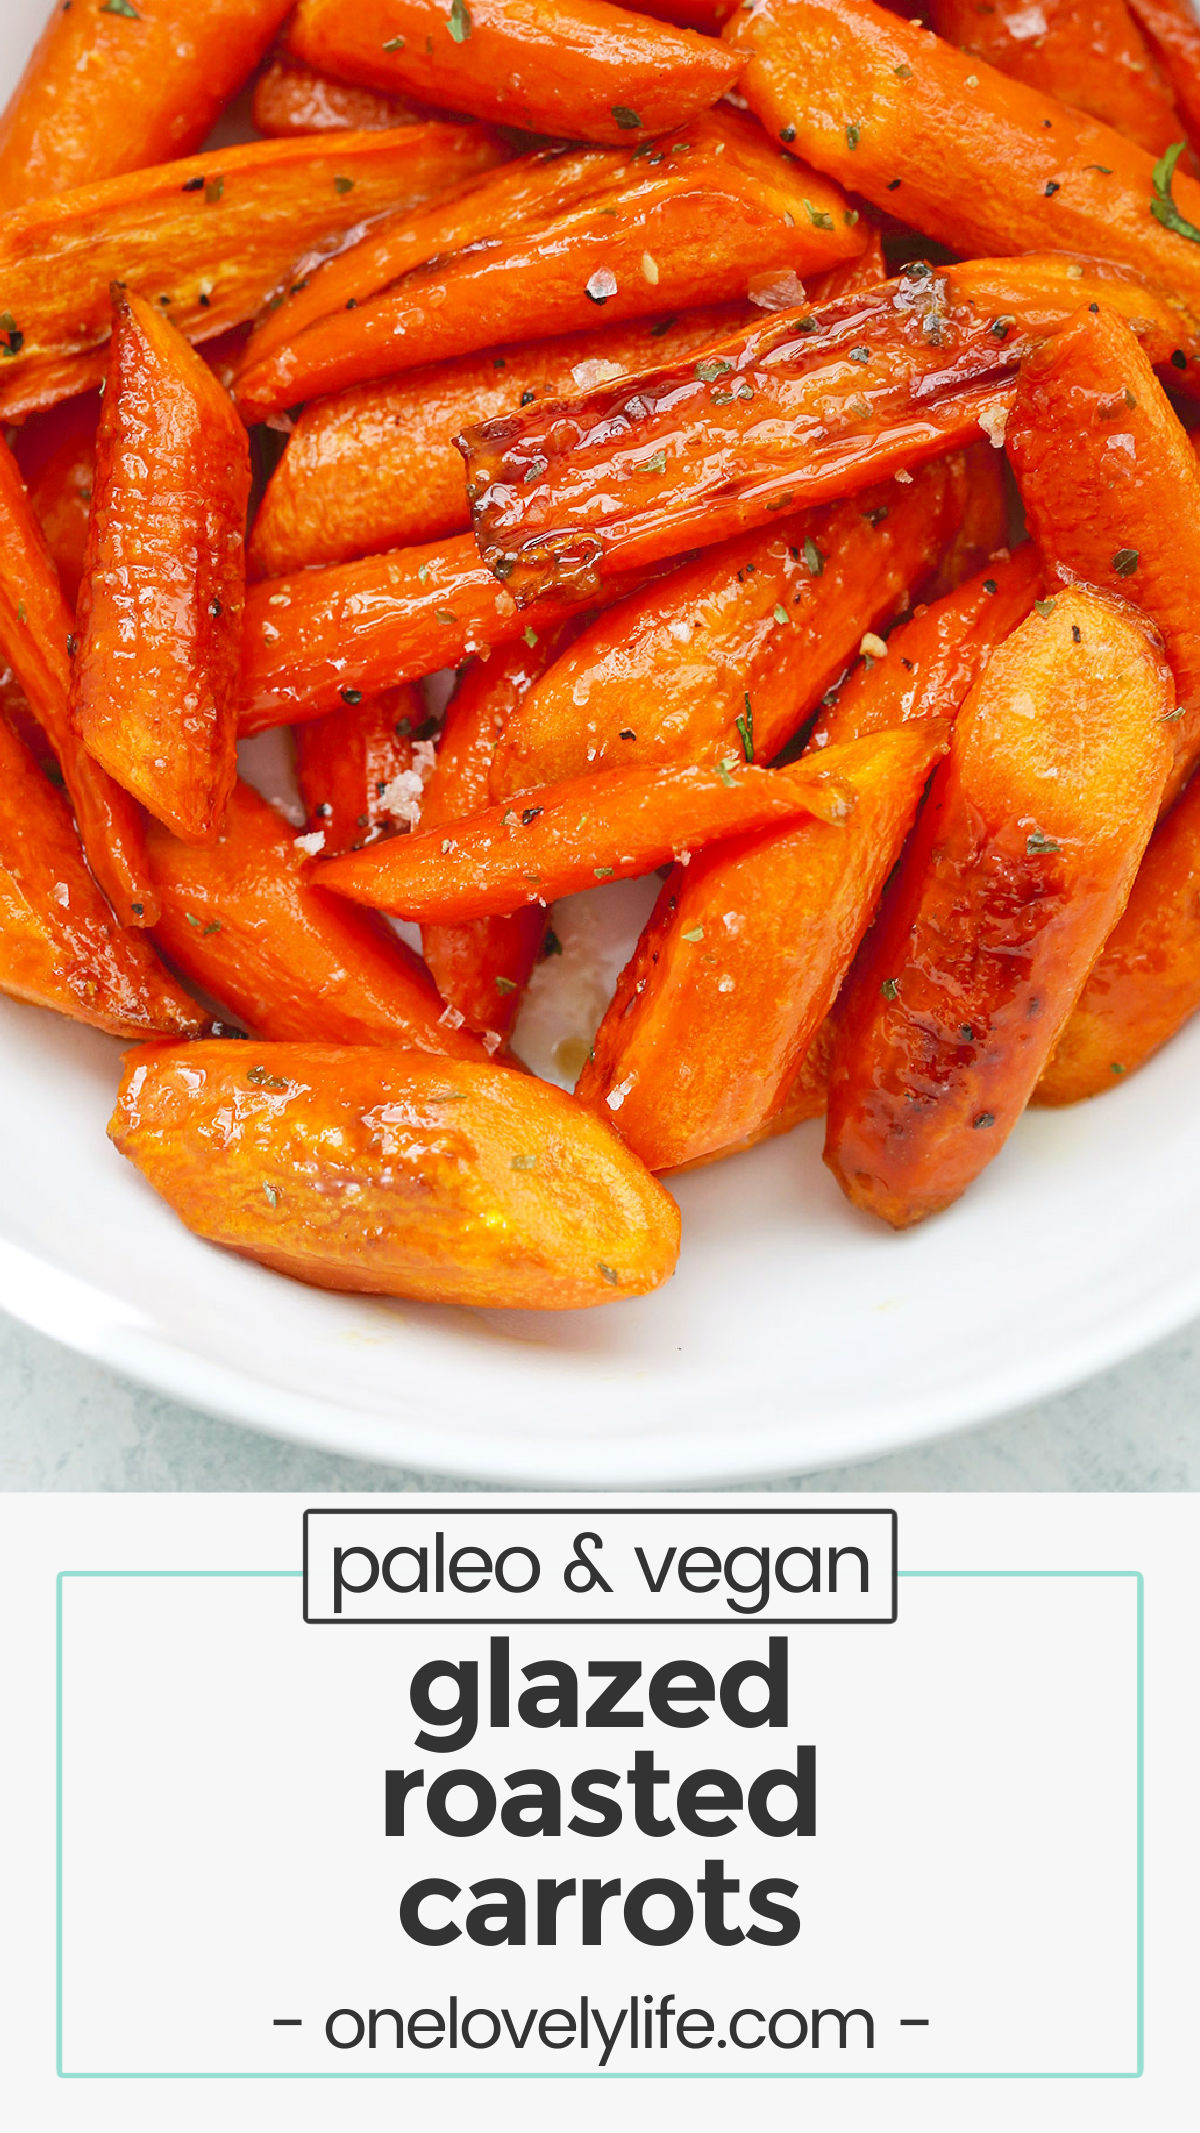 Maple Glazed Roasted Carrots - This is the BEST roasted carrots recipe! Sweet-glazed carrots with gorgeous caramelized edges make the perfect side dish. (Gluten-Free, Paleo & Vegan-Friendly) // Paleo Side Dish // Holiday Side Dish // Glazed Carrots // Roasted Carrots // Maple Glazed Carrots // Easter Side Dish // Vegan Glazed Carrots // Paleo Glazed Carrots // Vegan Thanksgiving // Paleo Thanskgiving // Healthy Thanksgiving